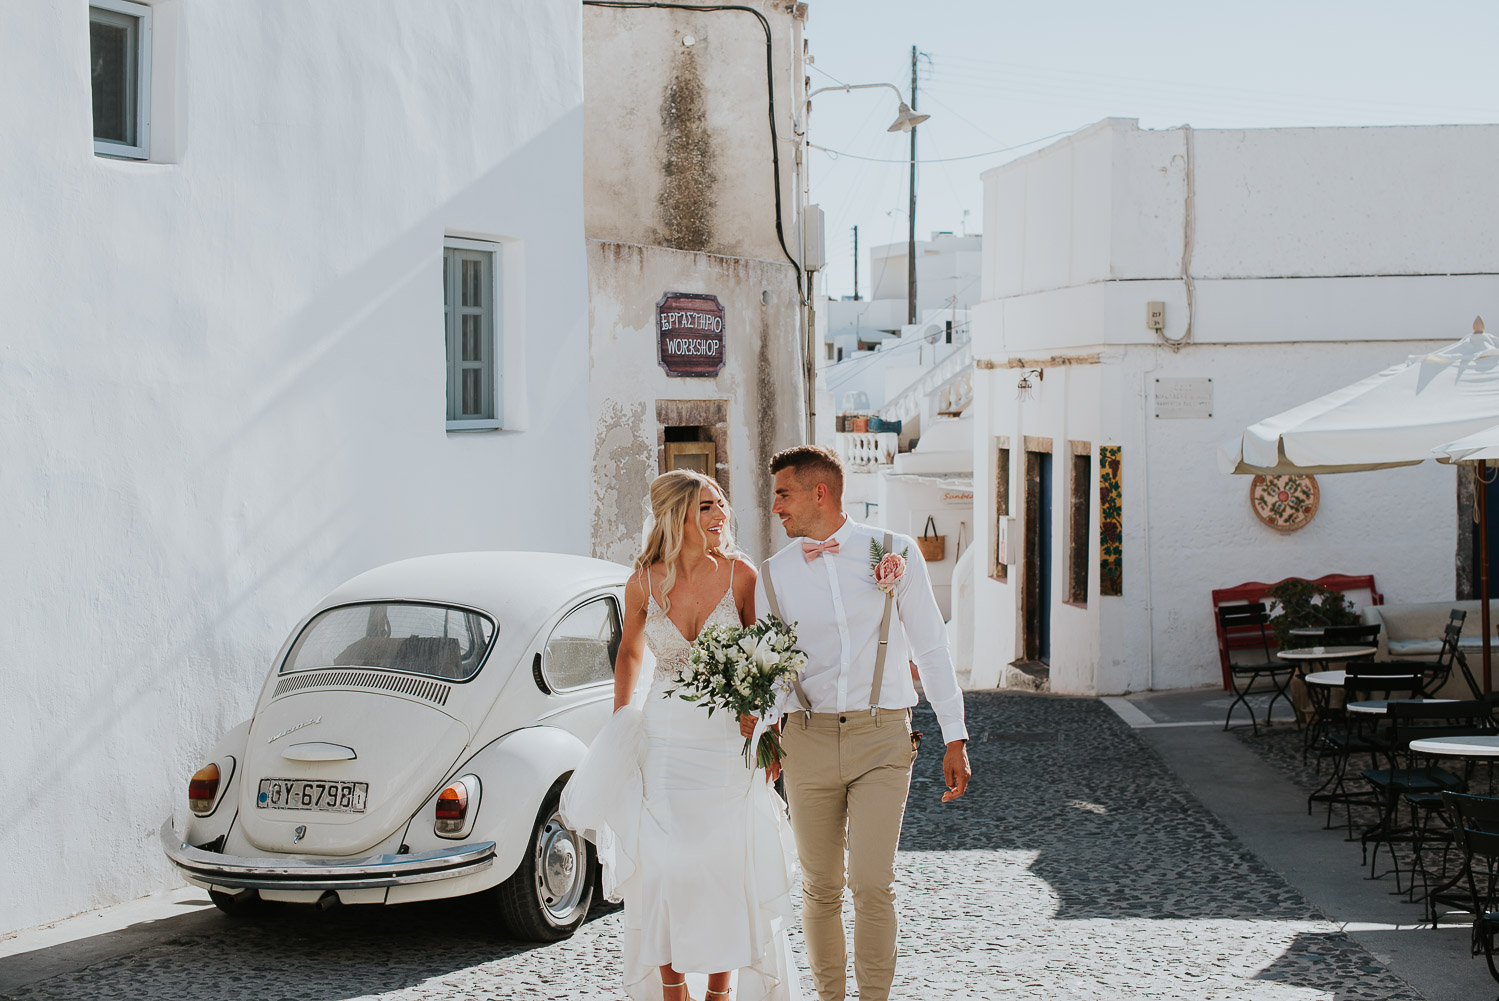 Wedding photographer Santorini: bride and groom walking up the cobbled stone street passing old beetle car  by Ben and Vesna.